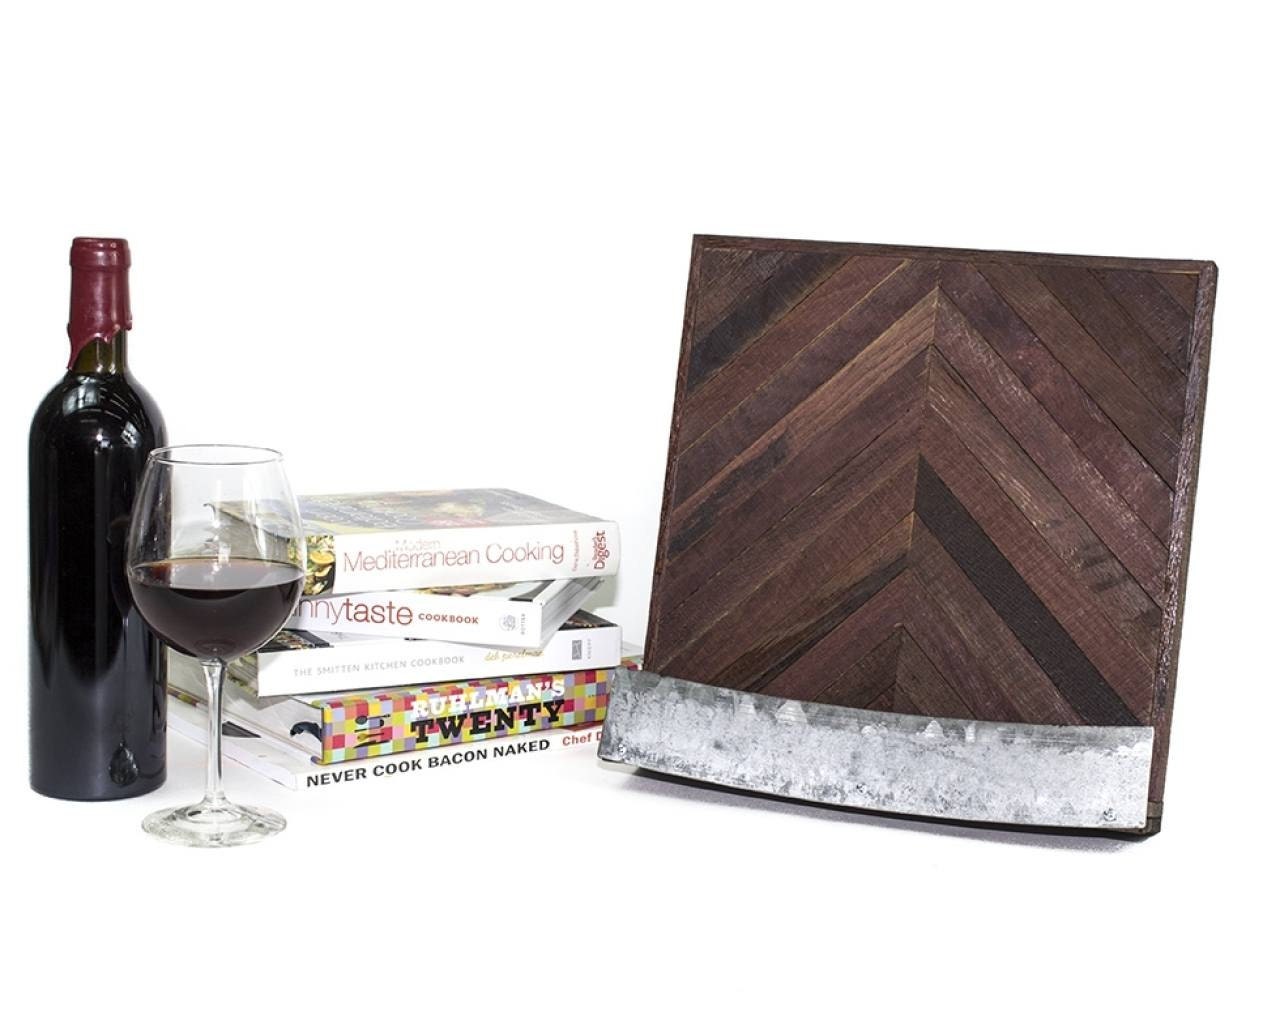 Wine Barrel Cookbook or Tablet Stand - Chevron - Made from reclaimed California wine barrels. 100% Recycled